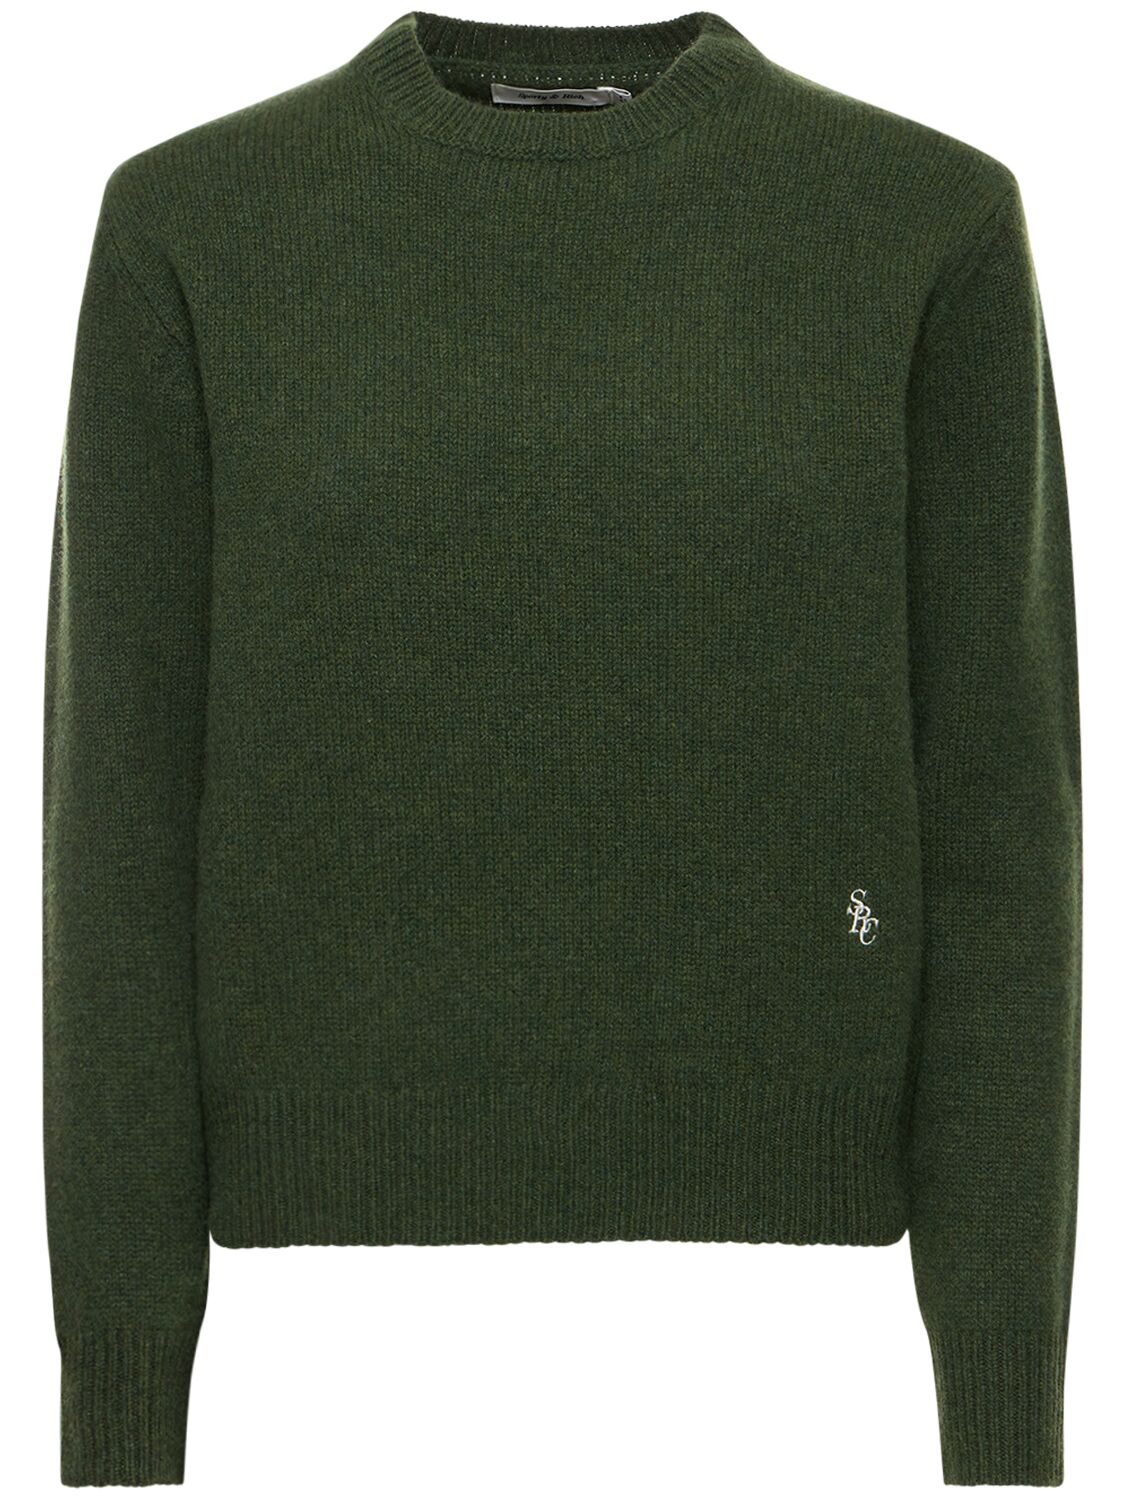 SPORTY AND RICH SRC WOOL CREWNECK SWEATER